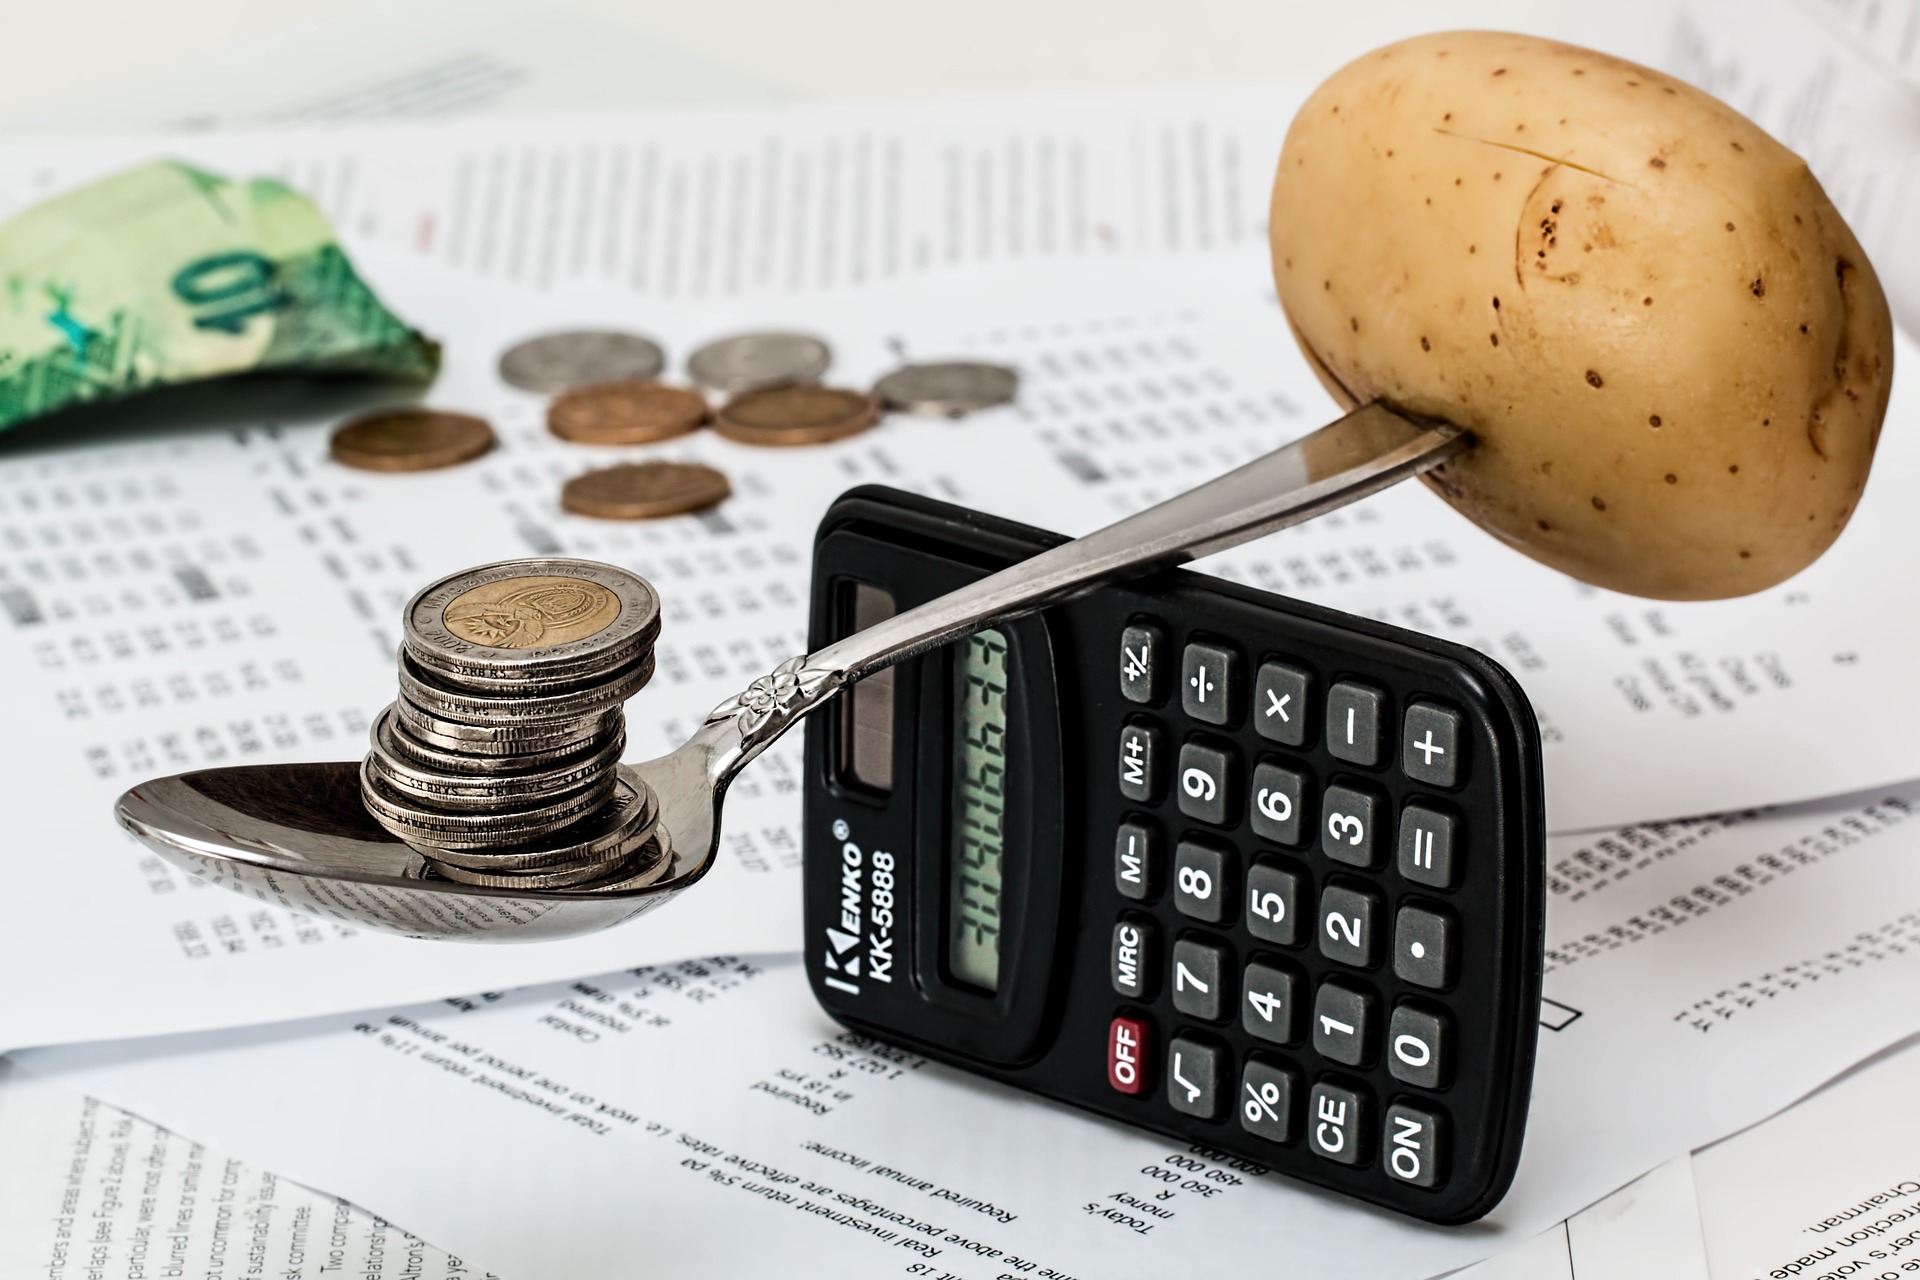 Coins and potatoes balanced on a spoon and calculator